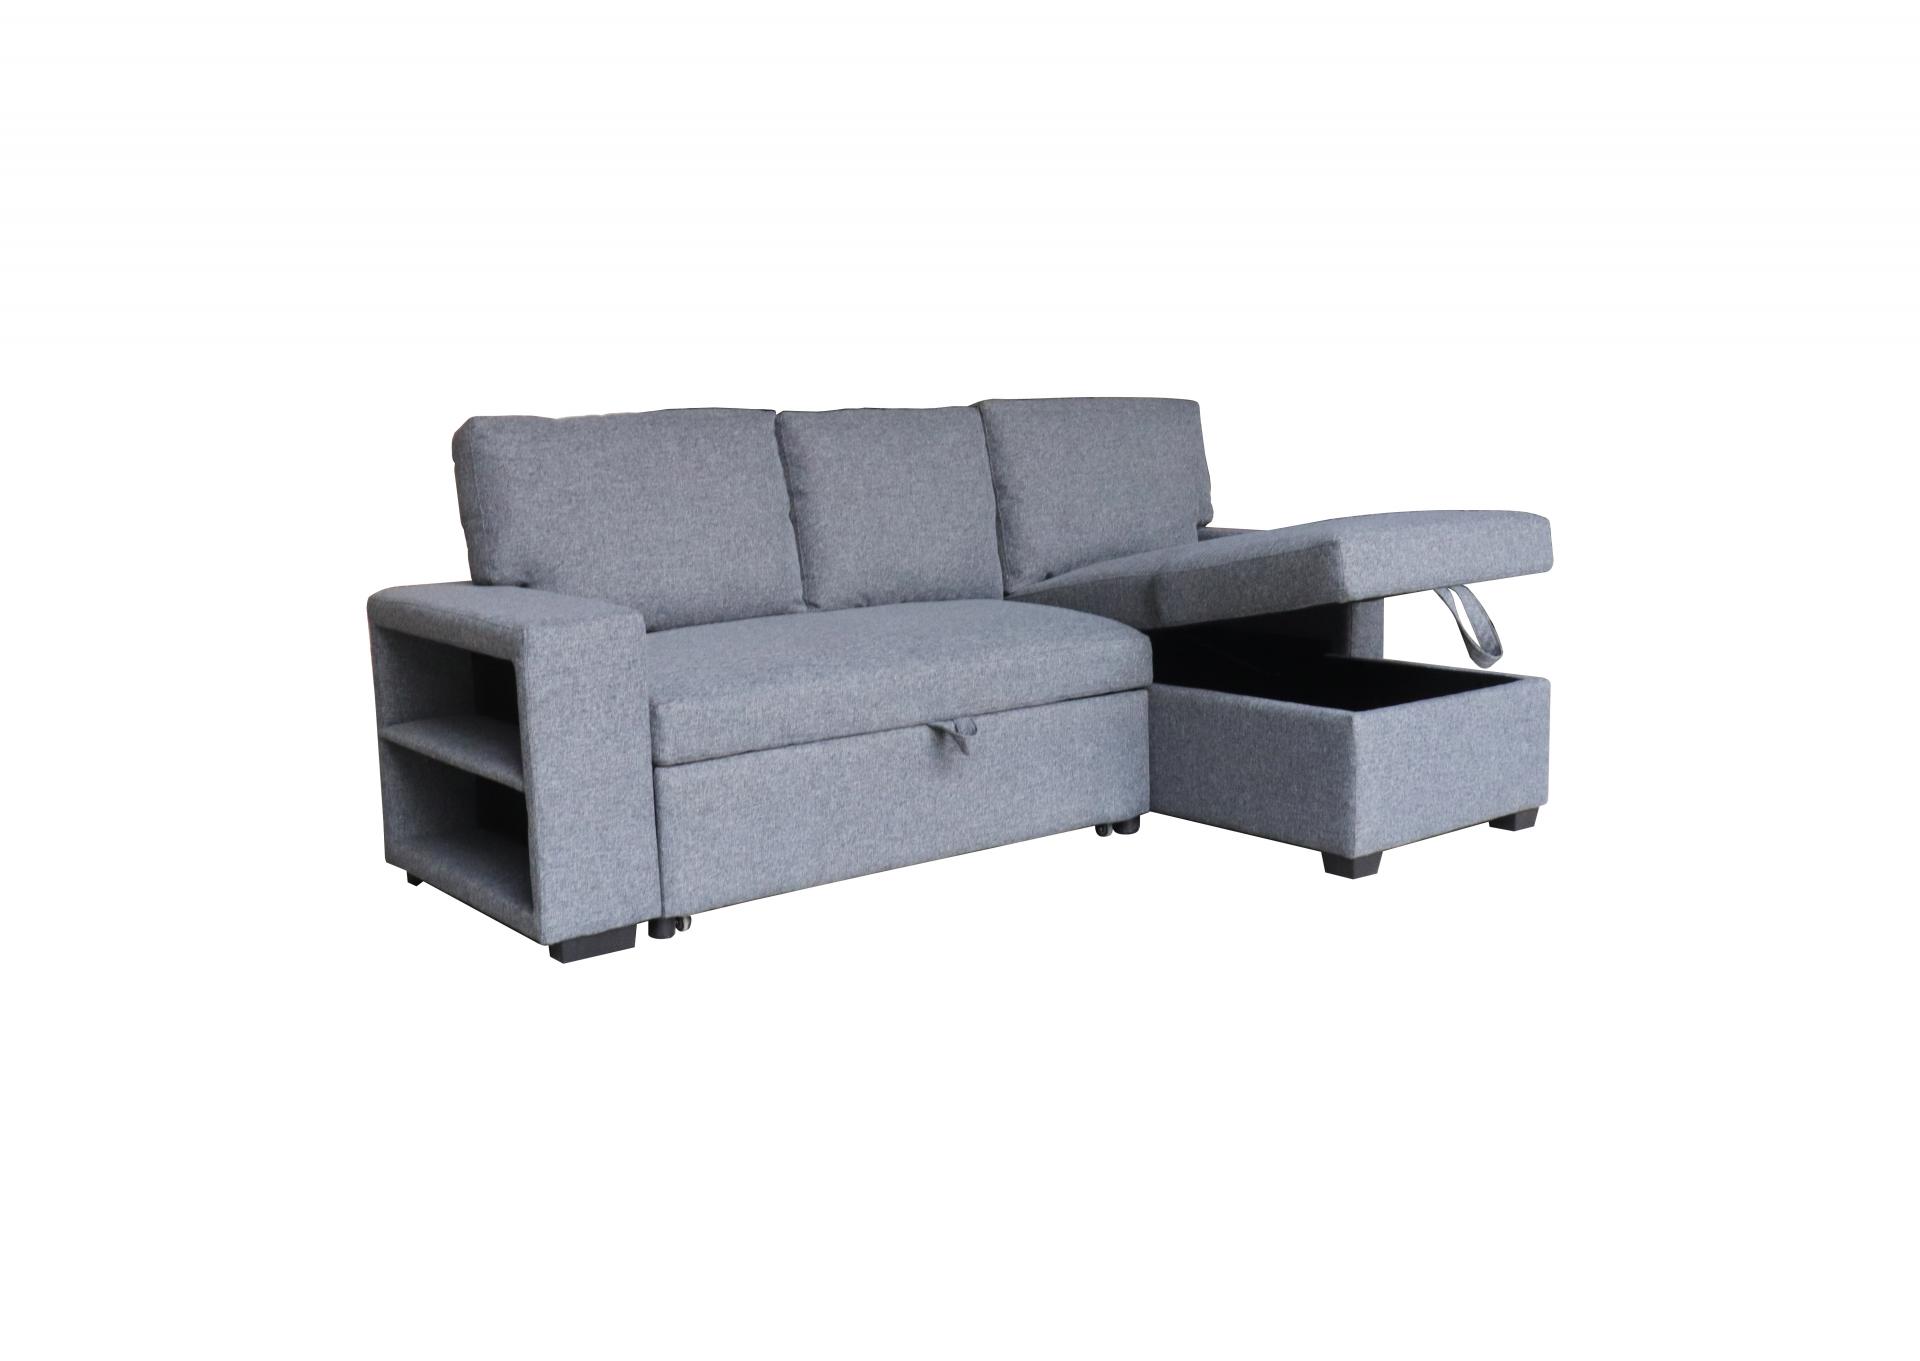 Media Sofa With Storage in Chaise